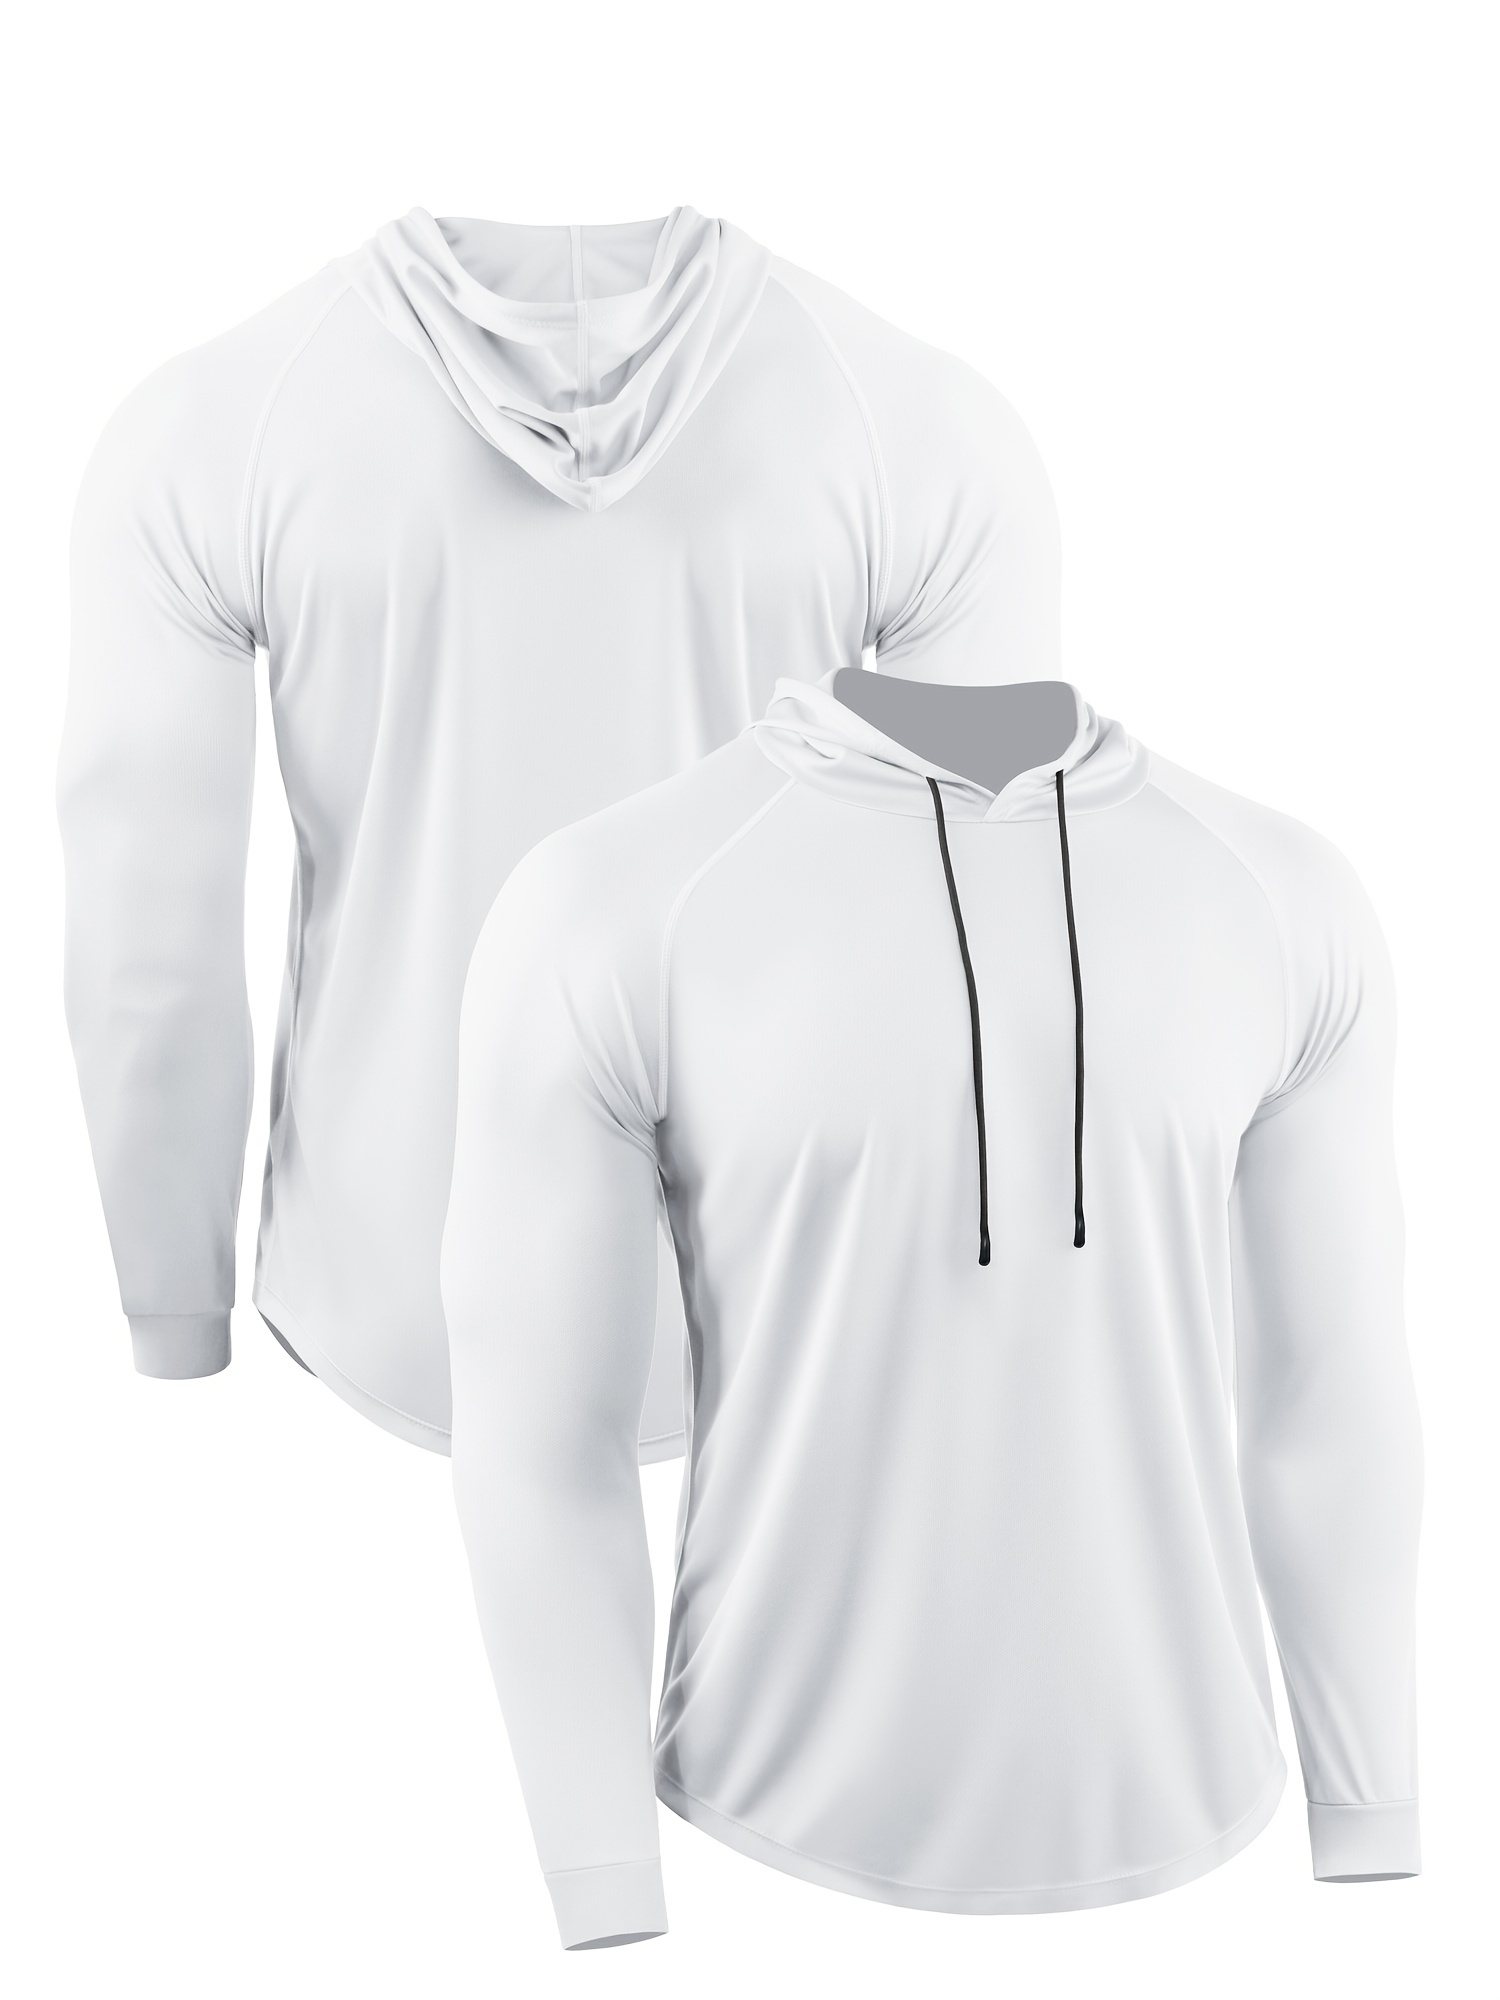 Men's Gym Tops - T-Shirts, Muscle Tees & Hoodies in White - Under